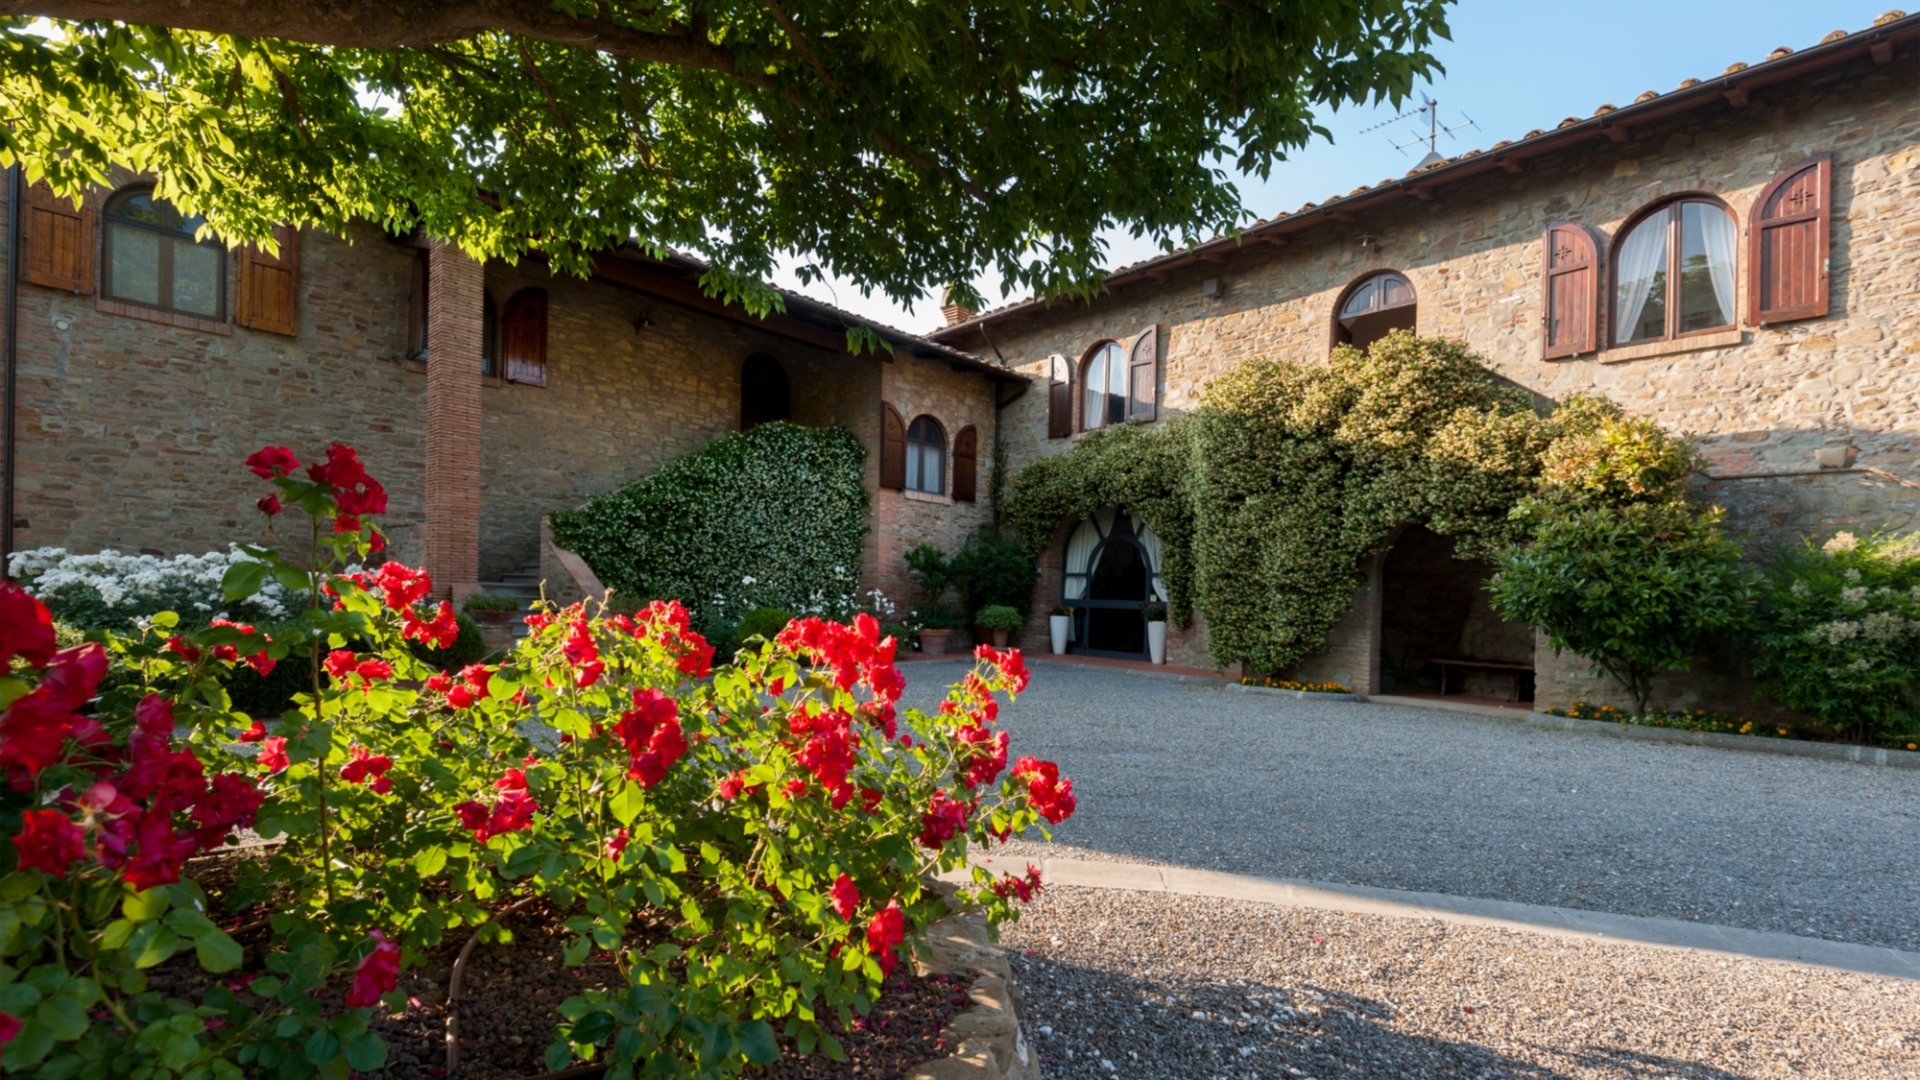 Private Villa in Tuscany countryside with swimming pool and garden